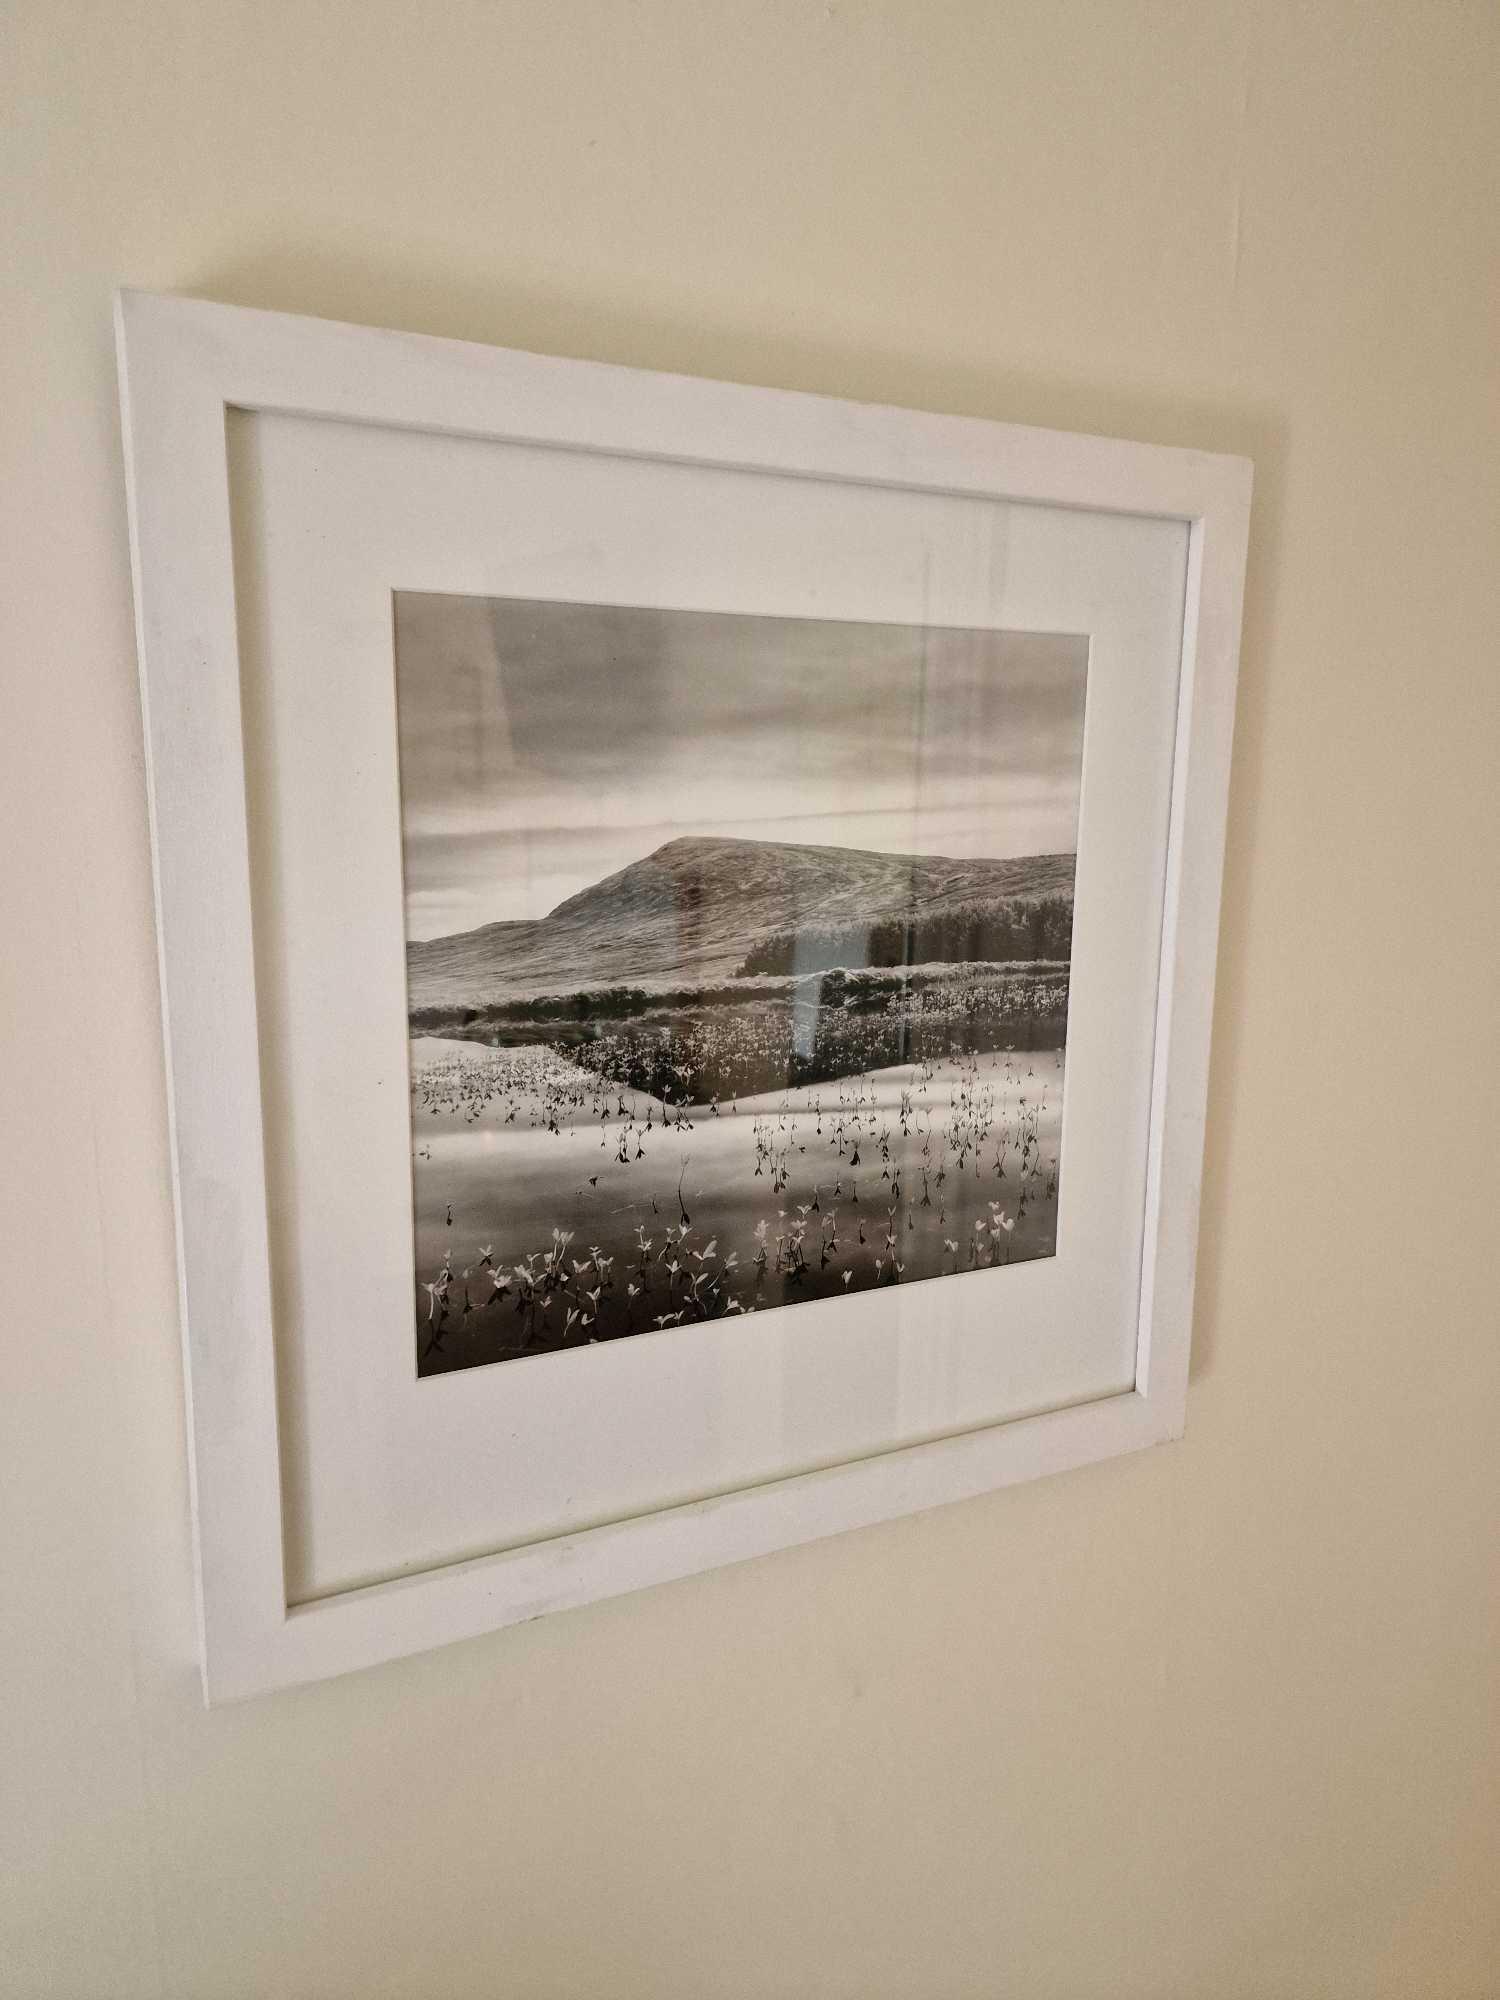 Gillian Allard Framed Print Distant Hill And Reflection Signed Verso In A White Wood Frame 48 x 49cm